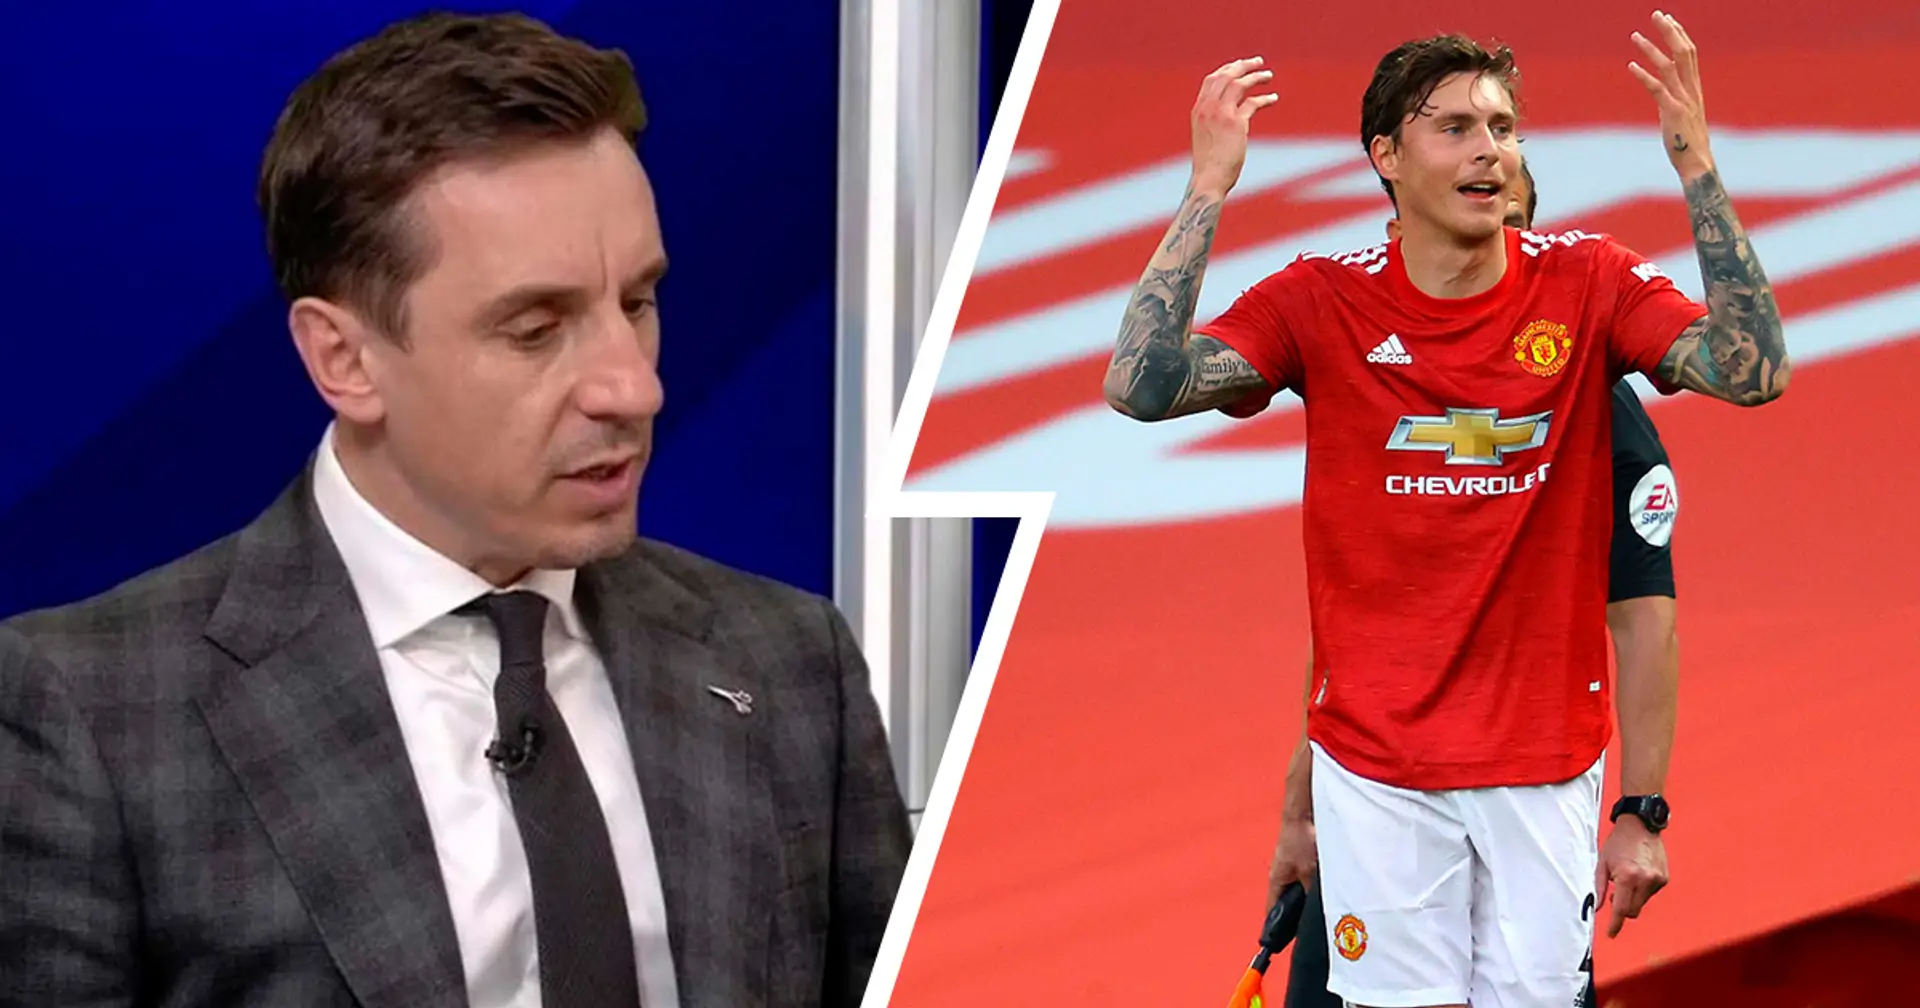 Gary Neville: 'United not going to win league with that centre-back pairing'